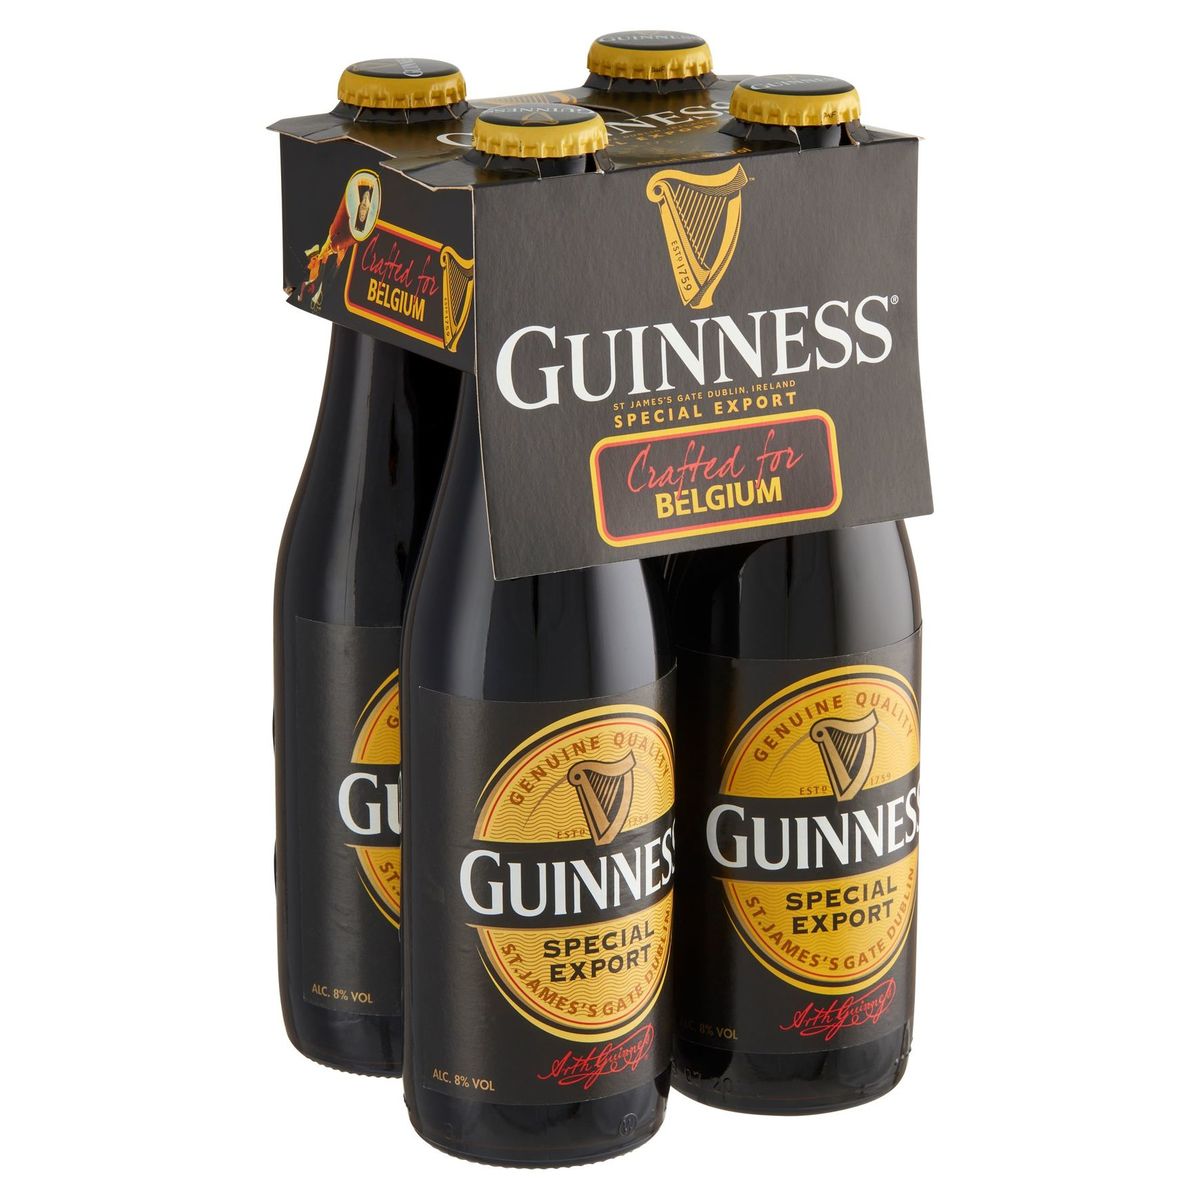 Guinness Special Export Bouteille 4 x 33 cl